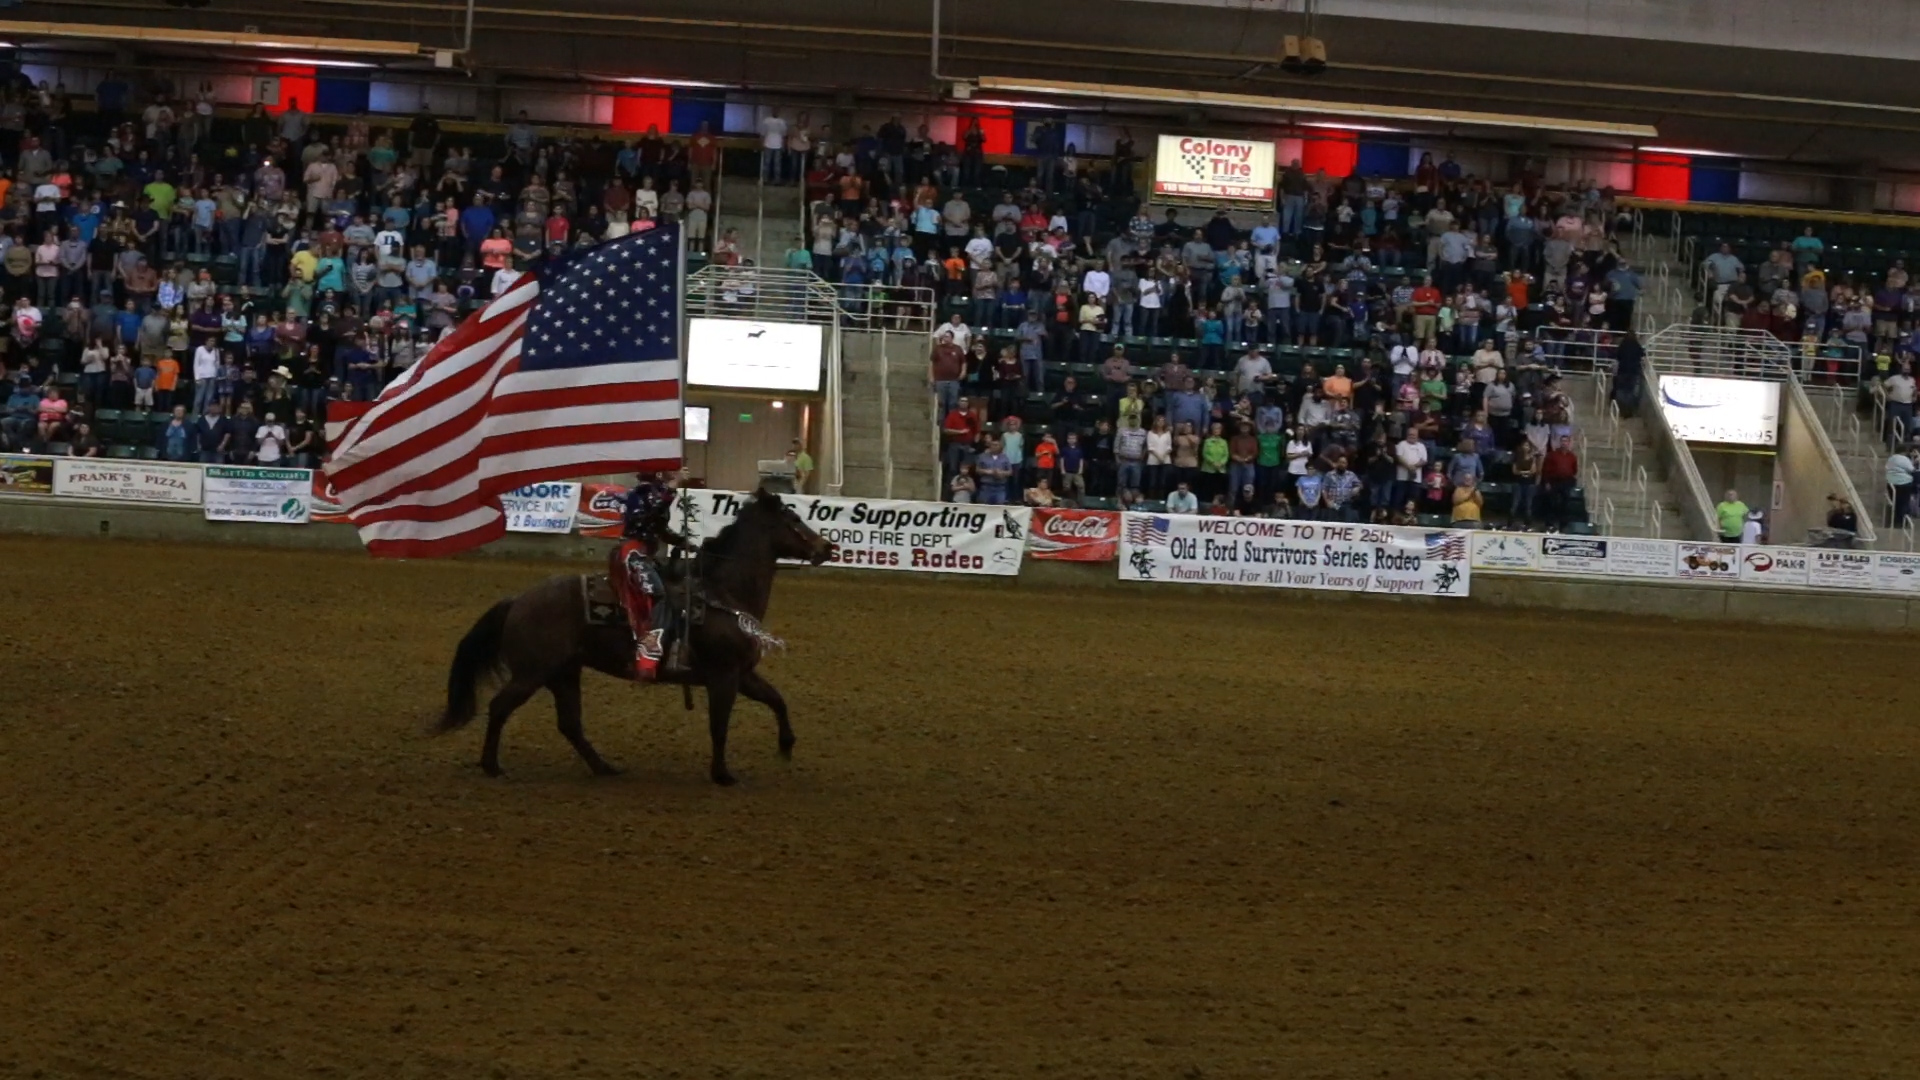 Crowd watching amercian flag on a horse.